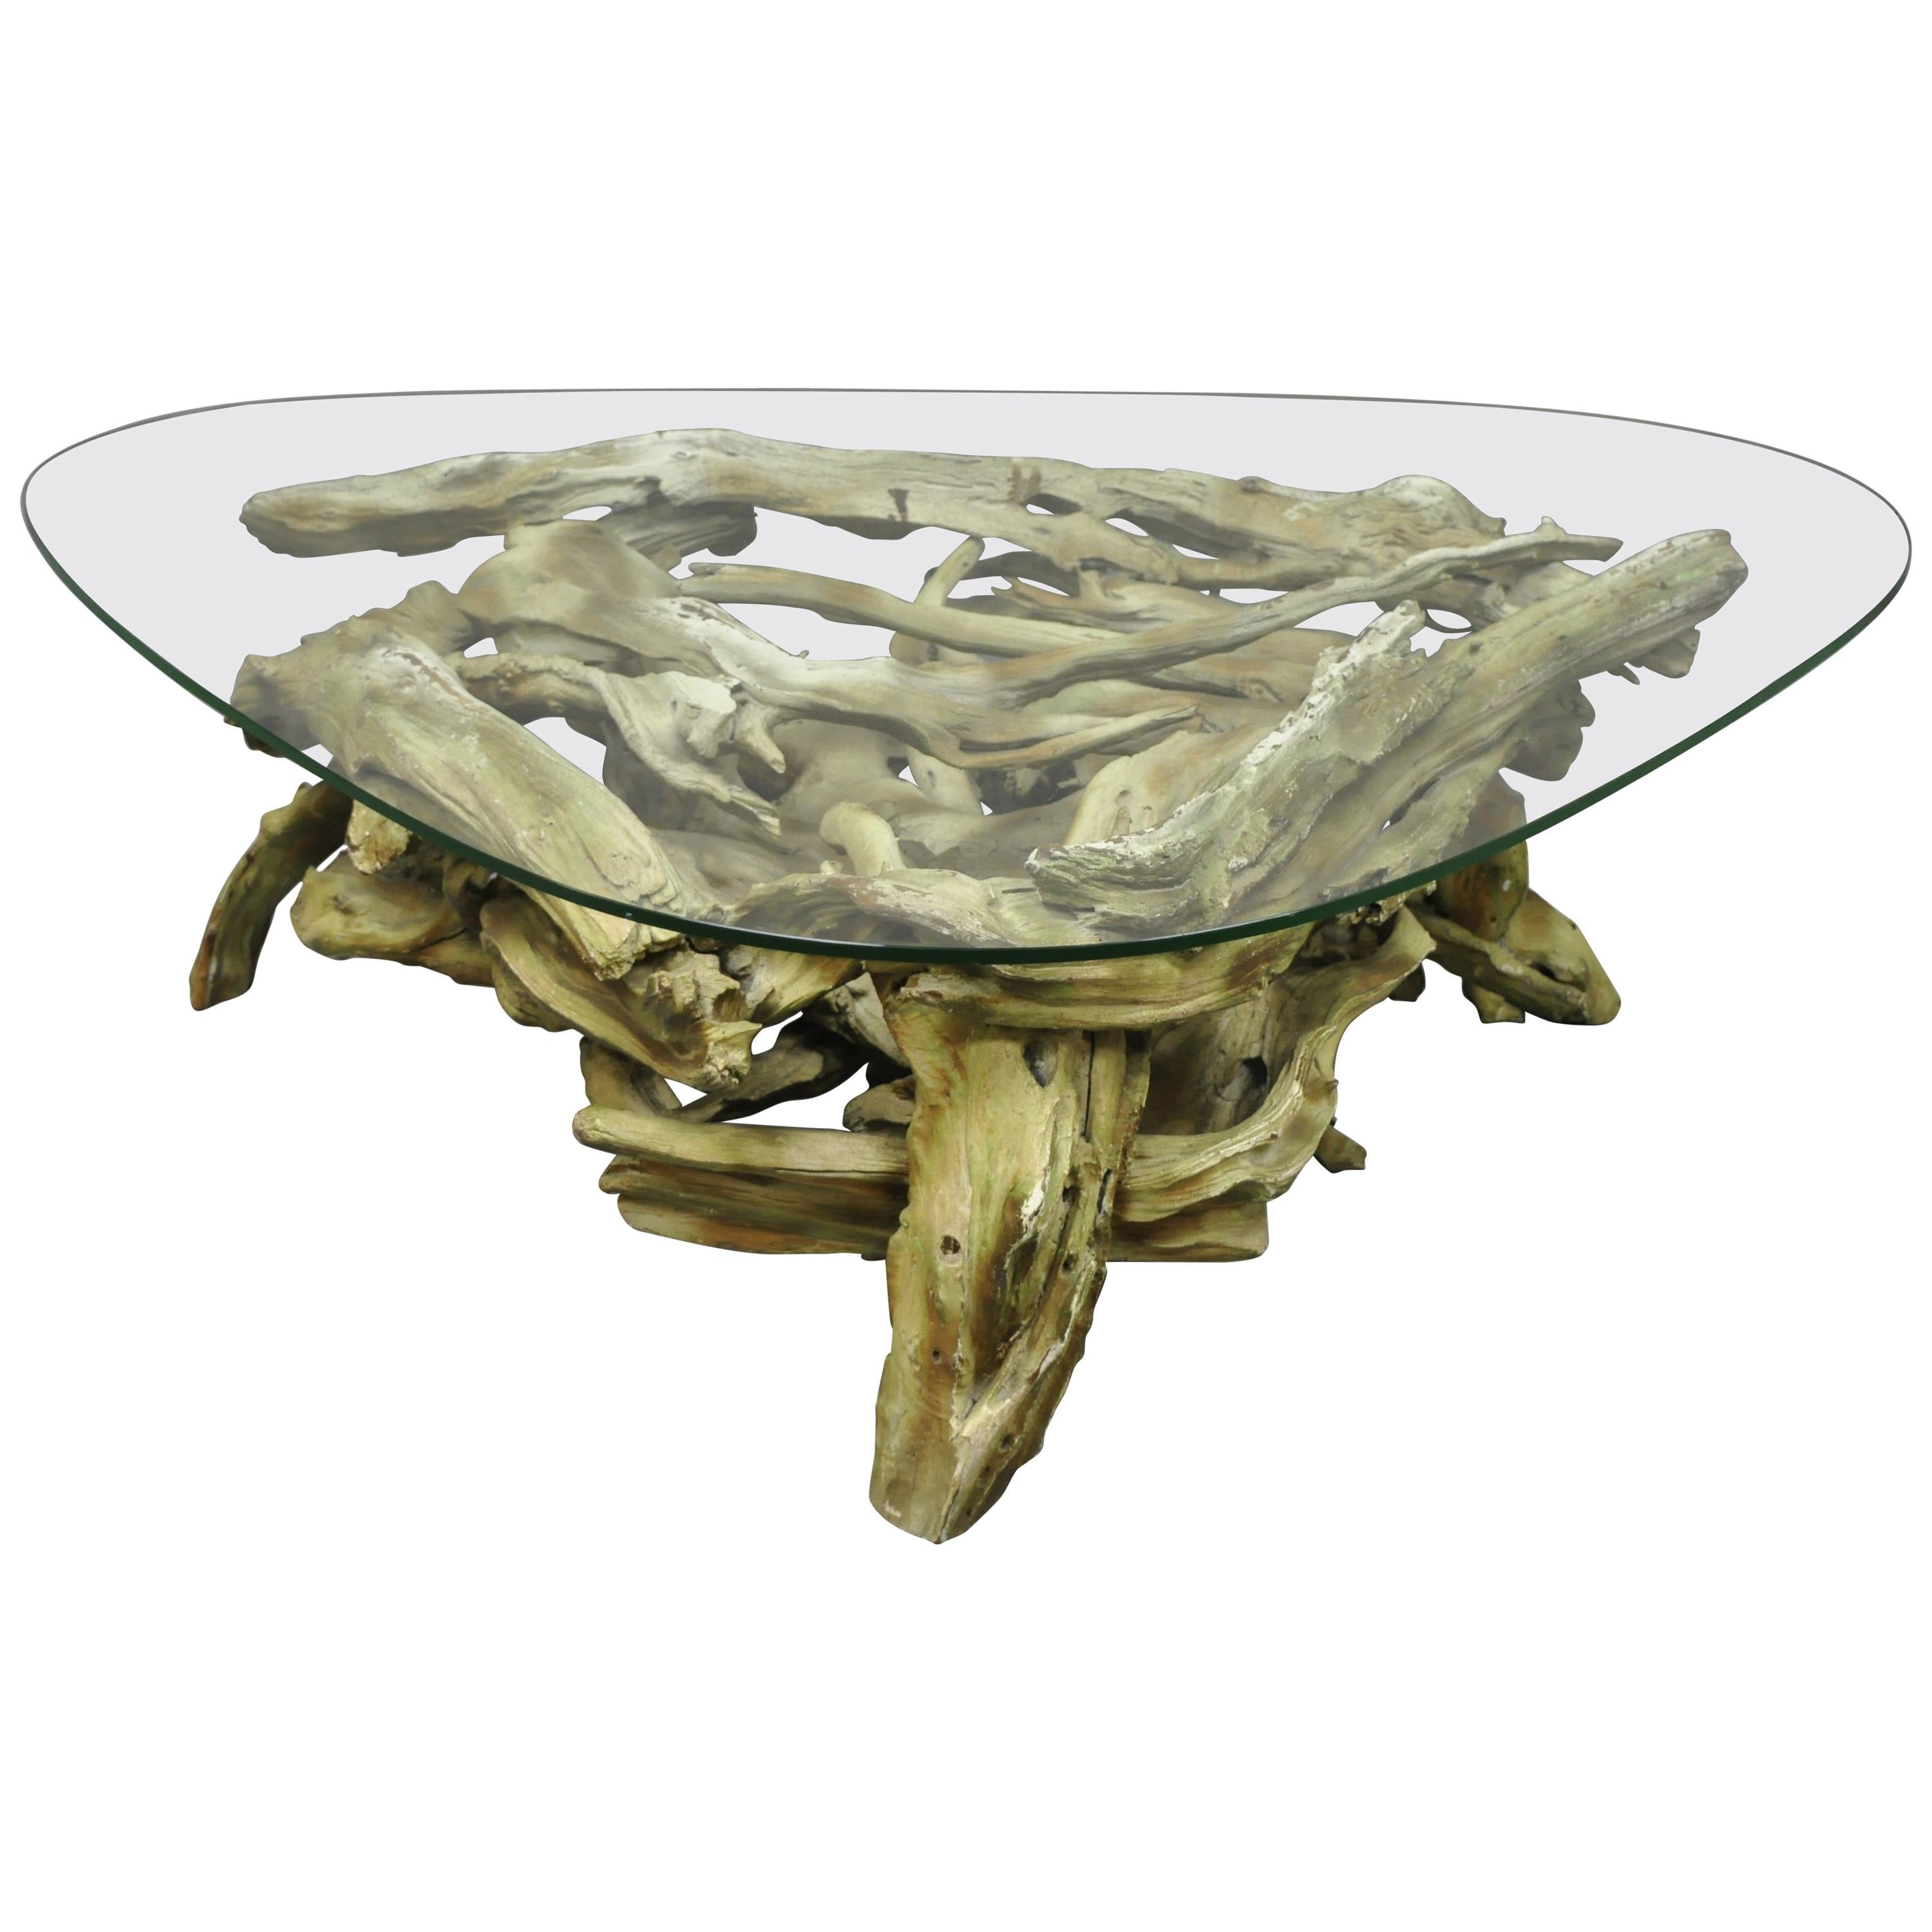 Sculptural Driftwood Mid-Century Modern Coffee Table with Glass Top